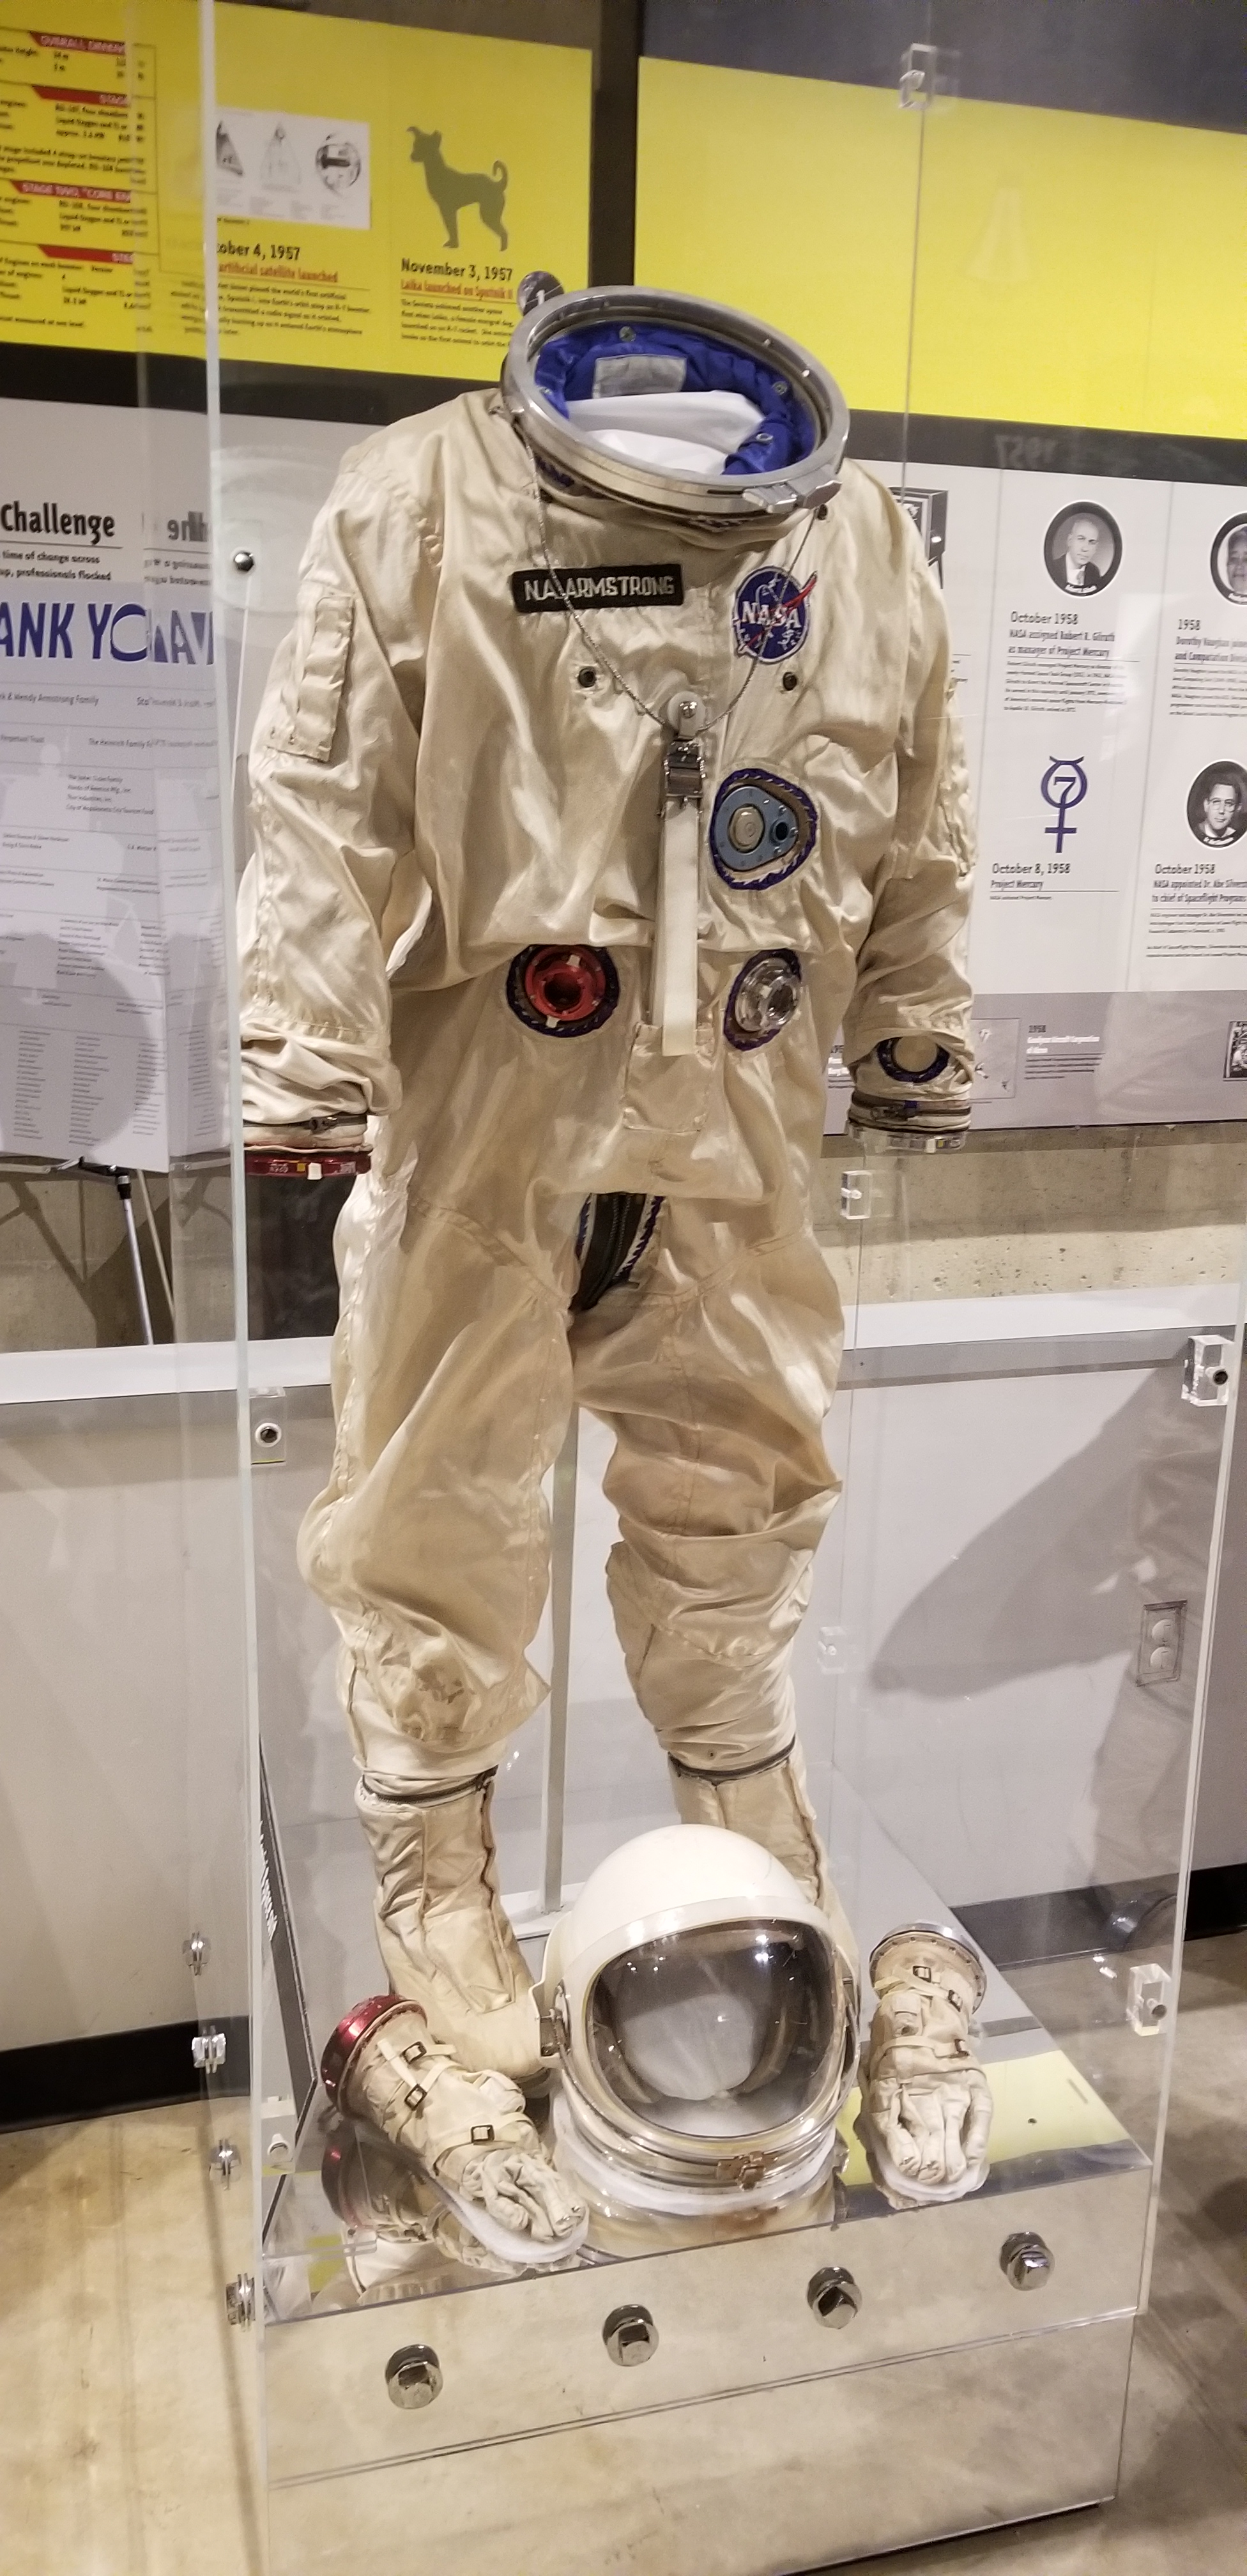 Neil Armstrong's suit from the Gemini program at the Armstrong Air and Space Museum